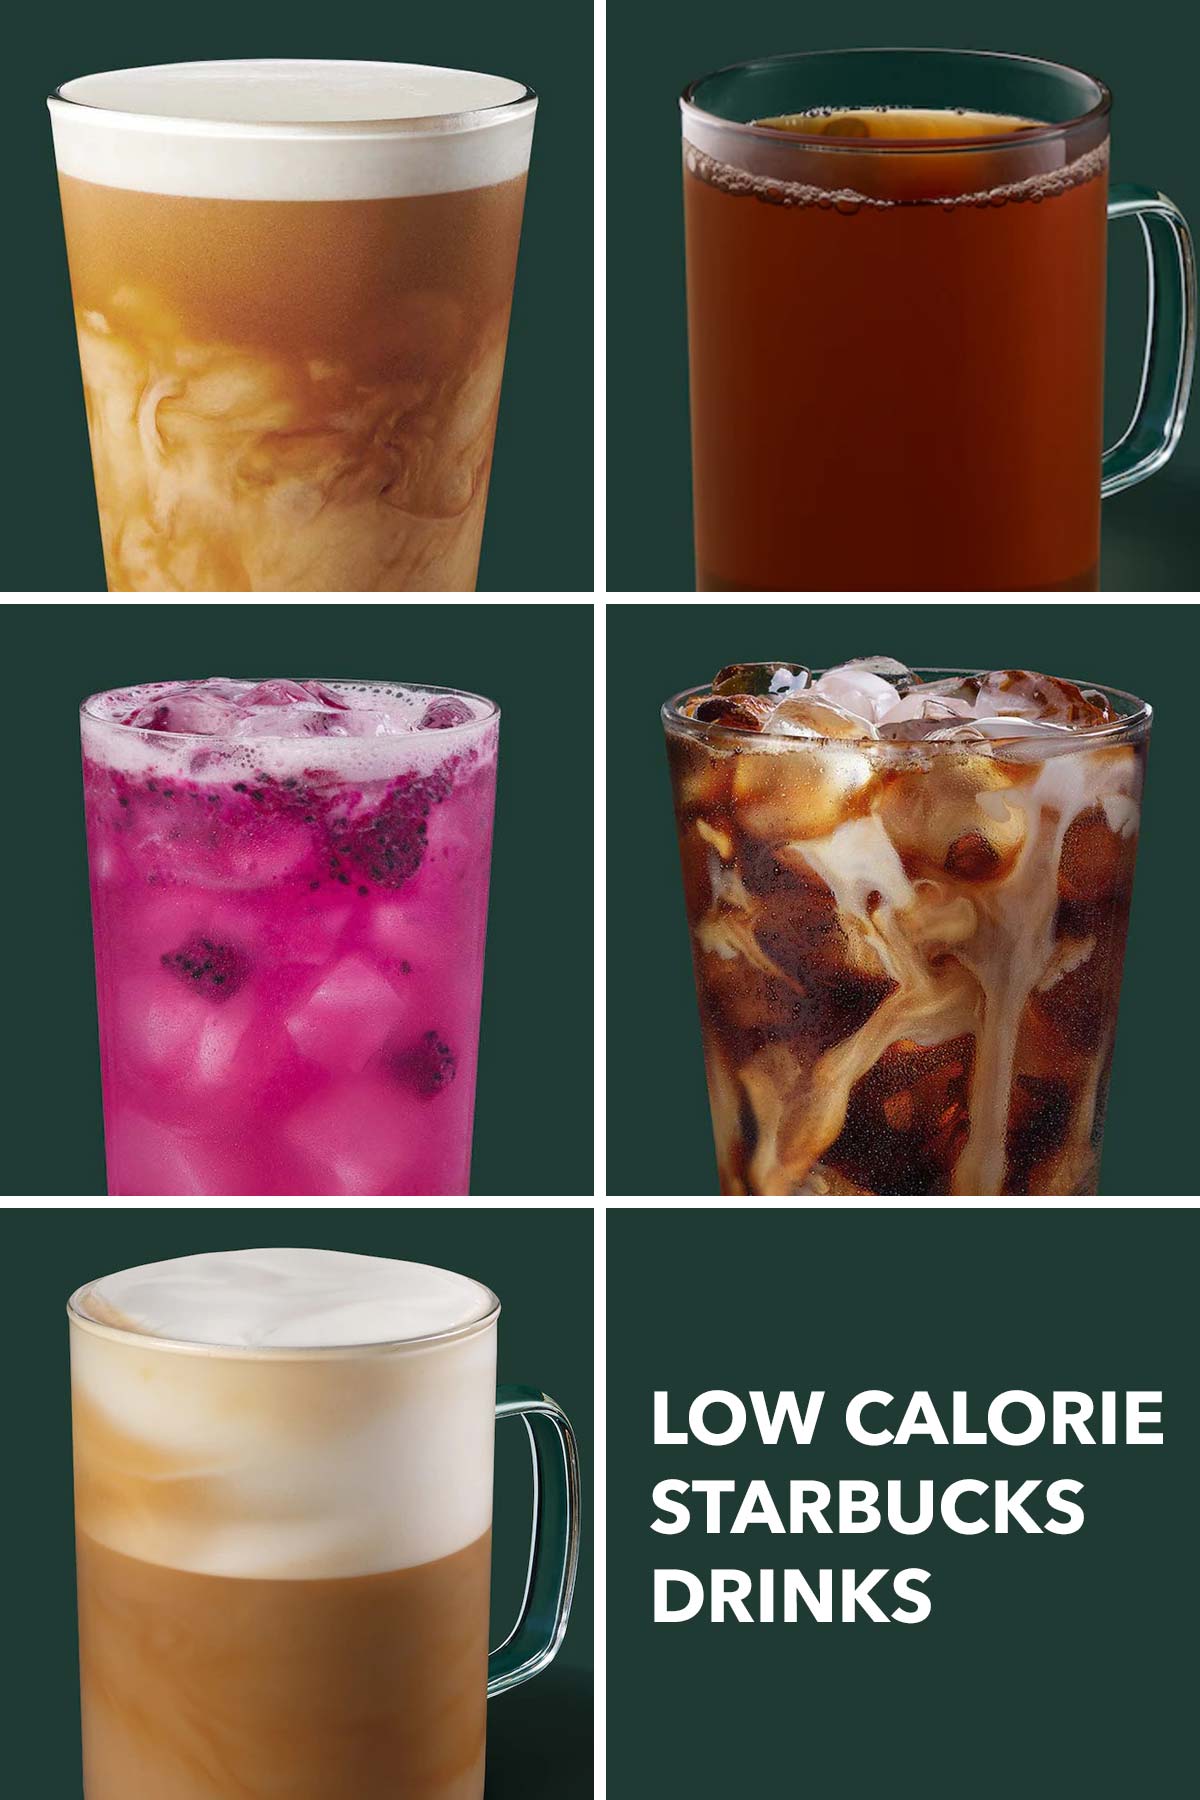 Five Starbucks drinks that are under 150 calories.